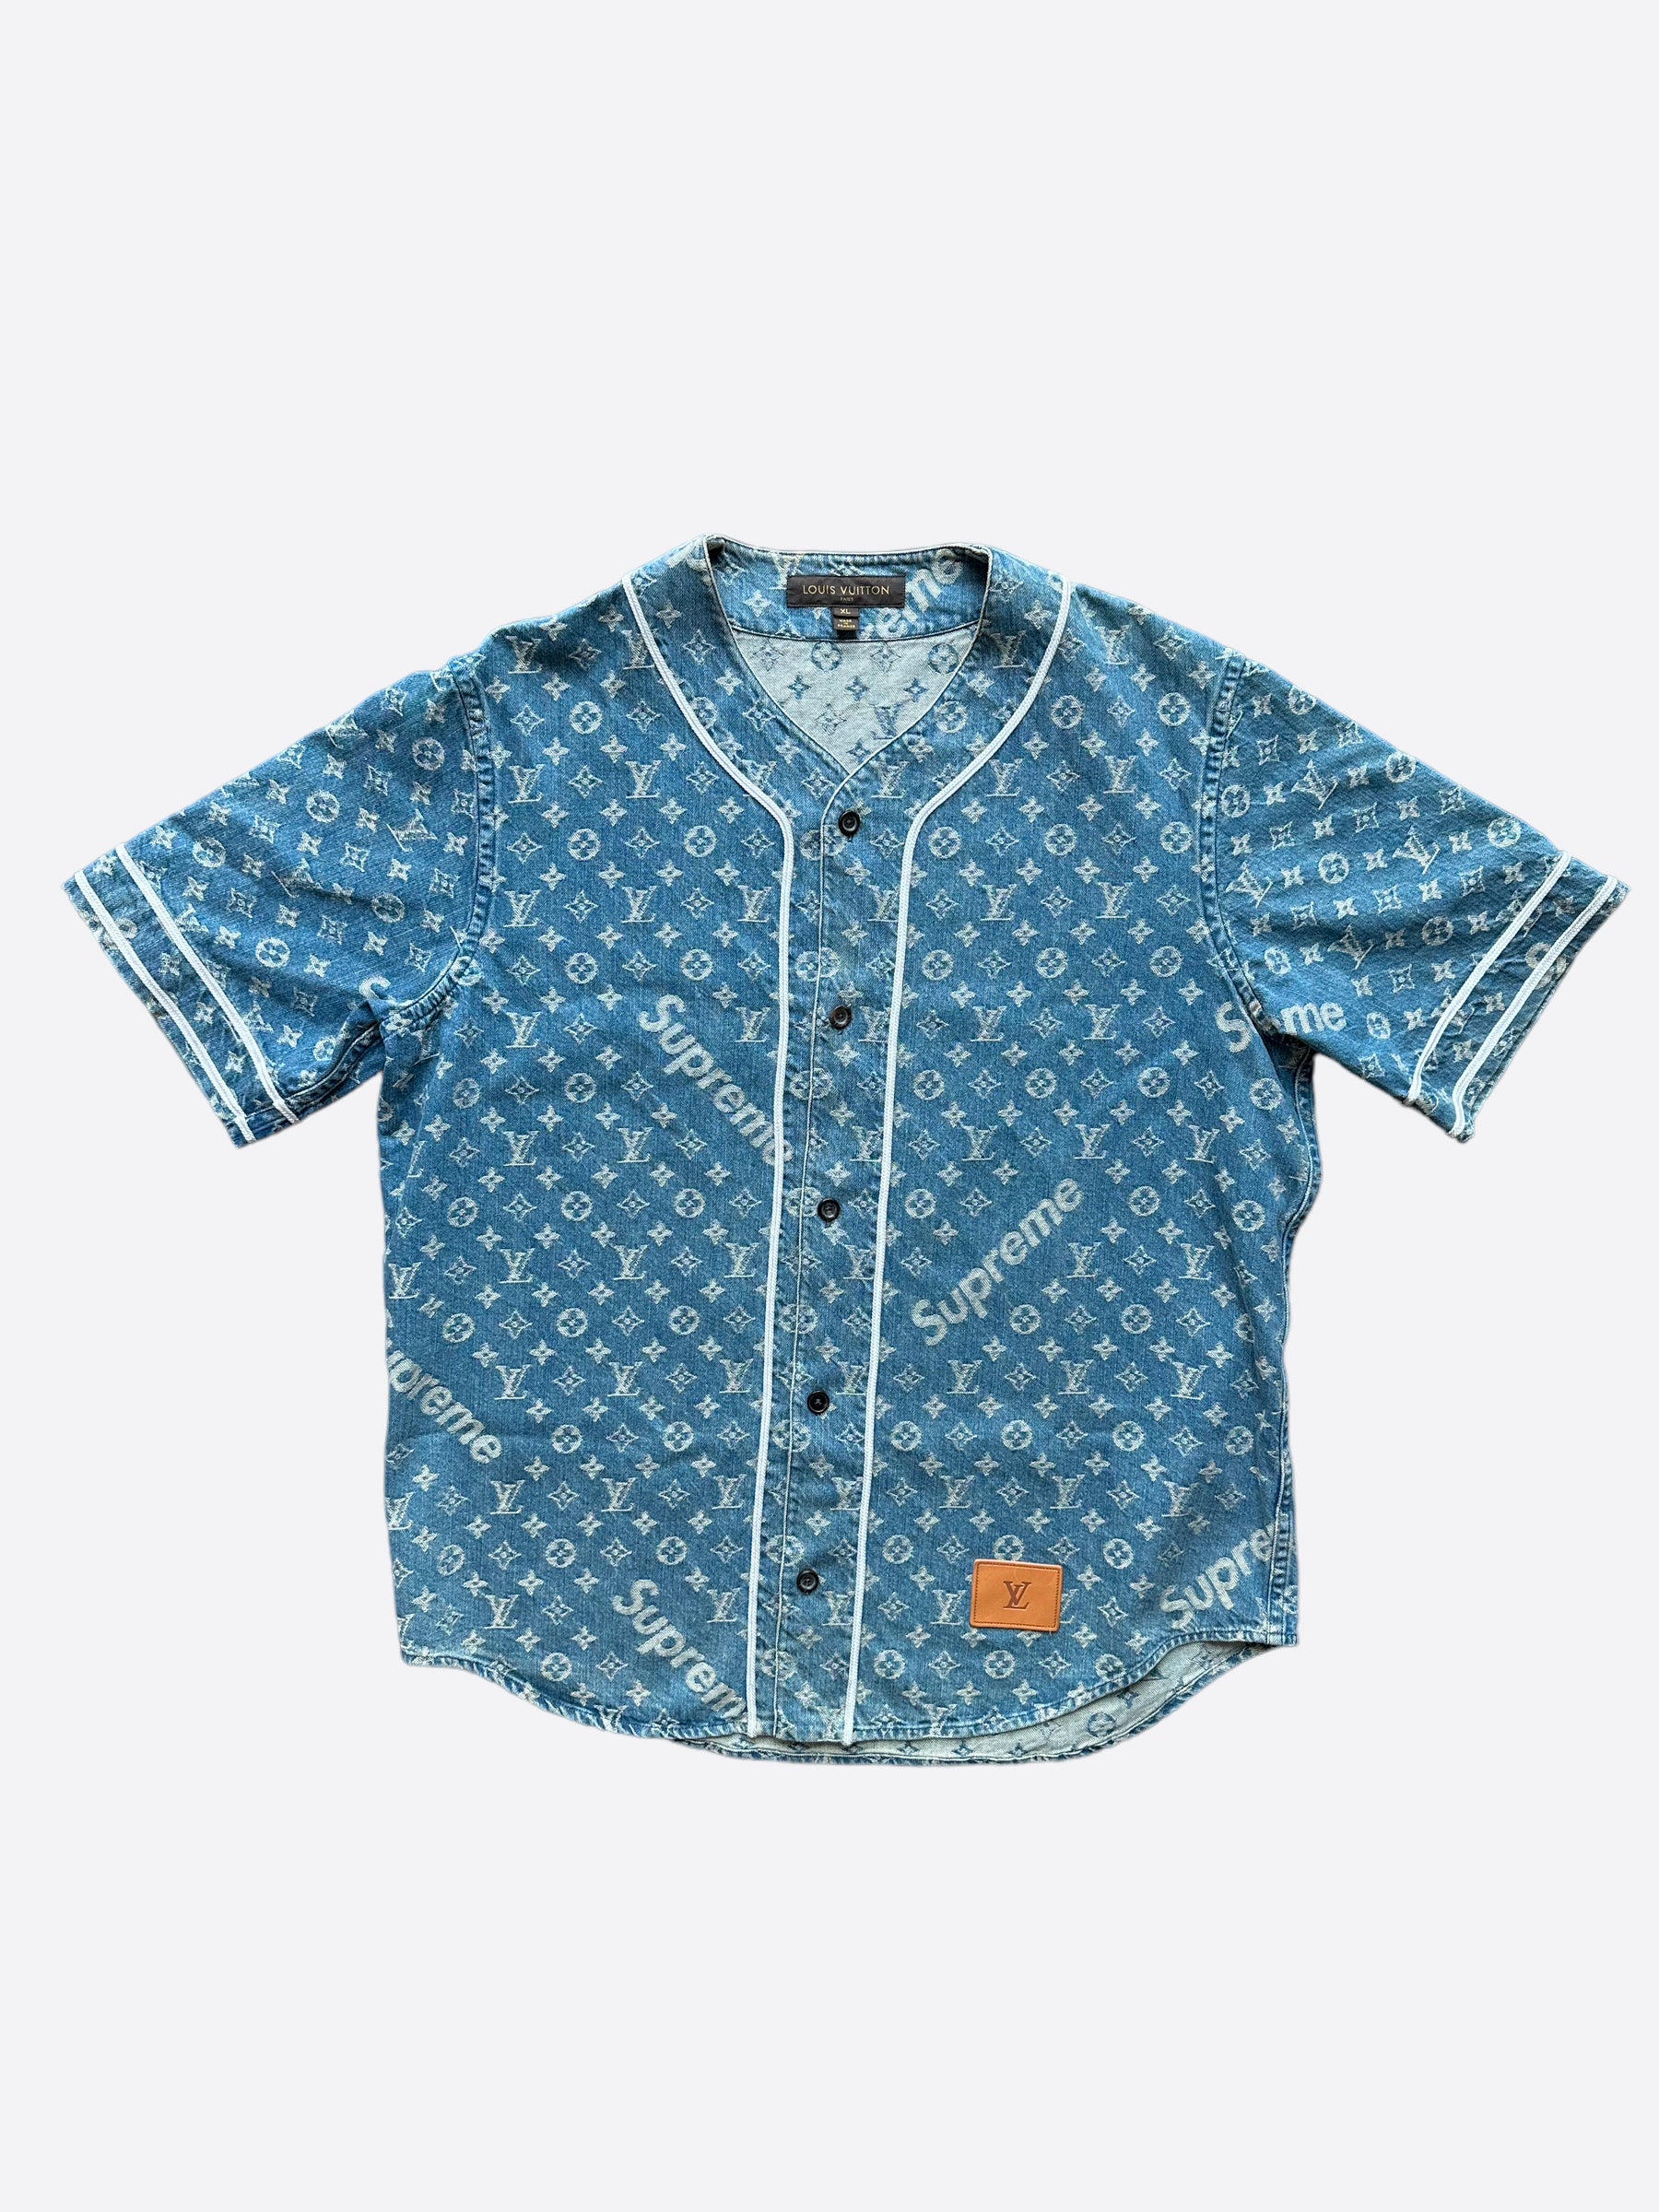 LOUIS VUITTON LUXURY BRAND BASEBALL JERSEY, by responsible level